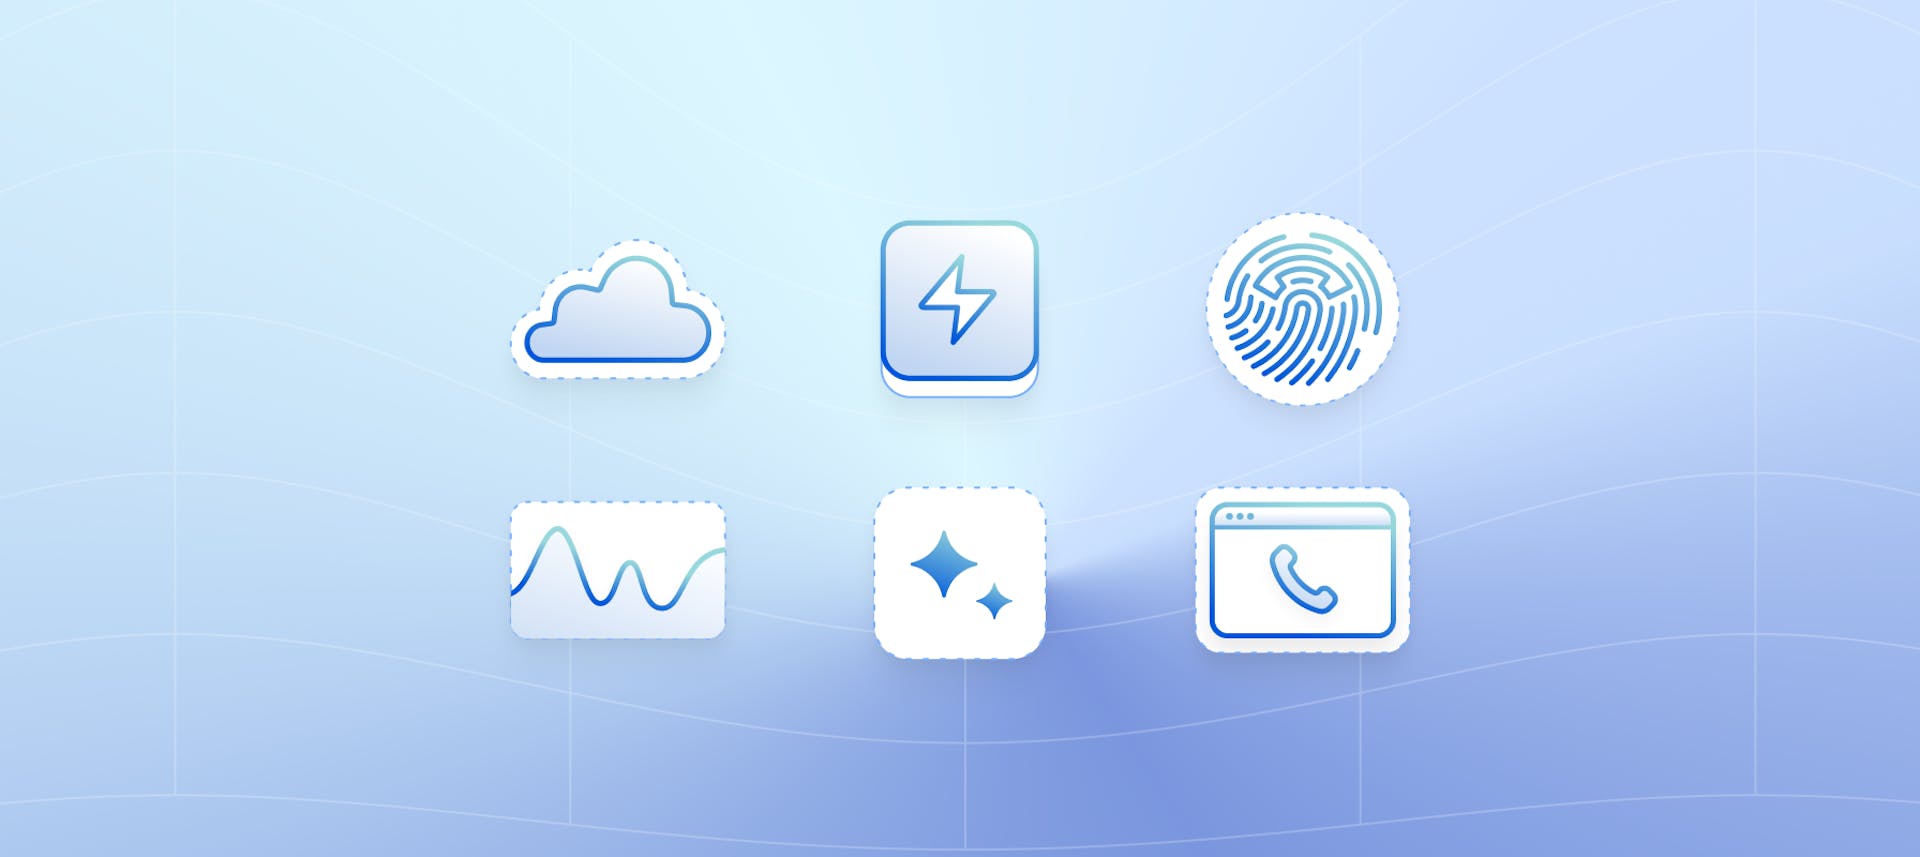 Icons to represent Cloud, plug-and-play, encryption, data insights, CRM integration, documentation and training.